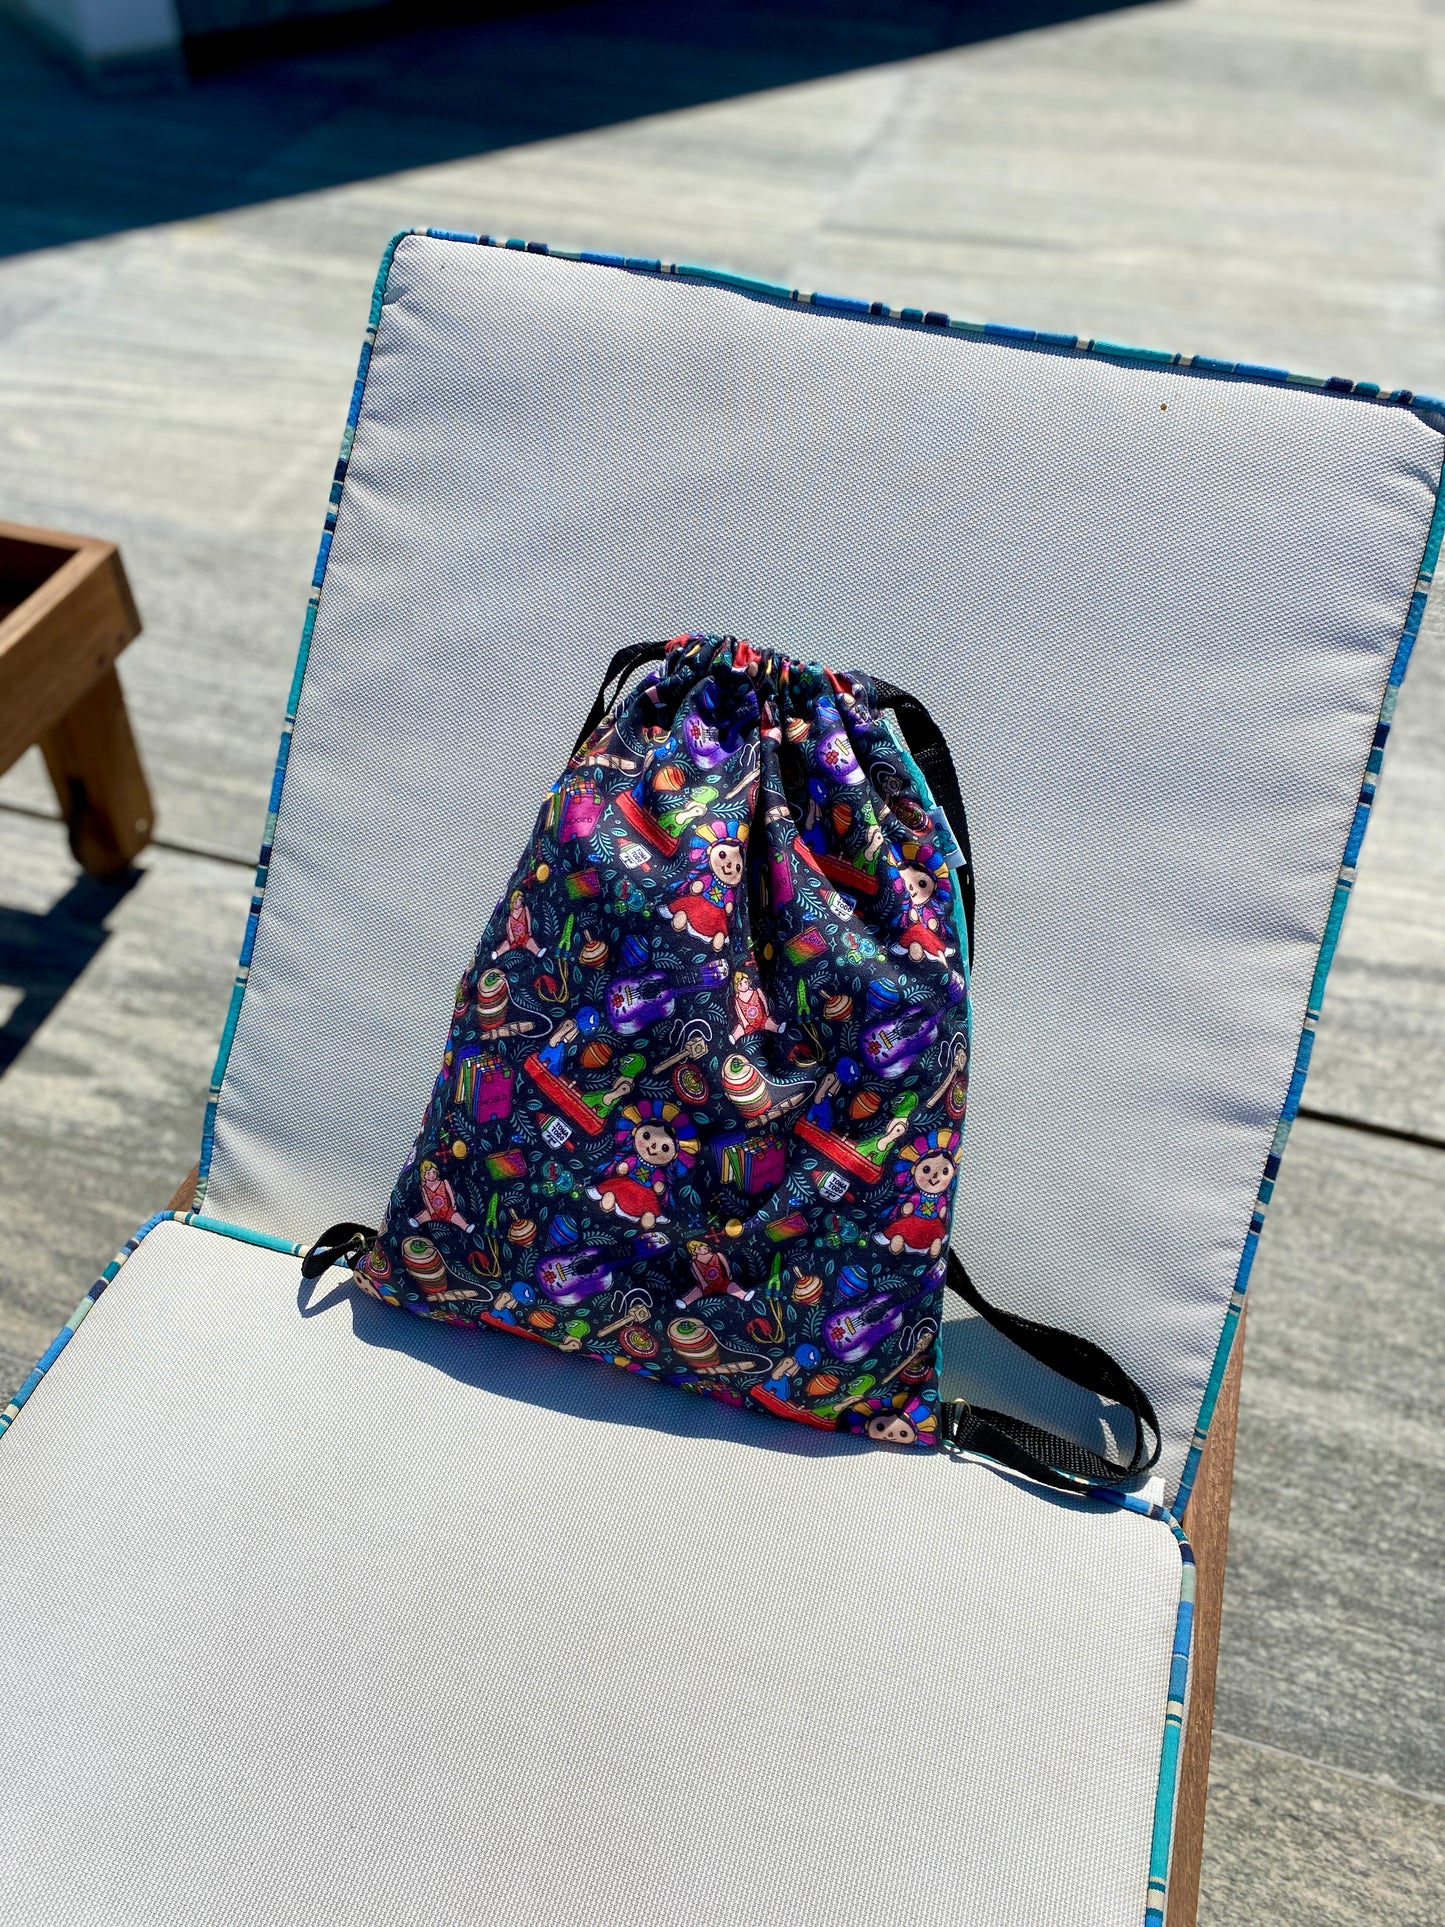 Toys Beach Towel Backpack - 2-in-1 Sand-Free, Quick-Dry, & Versatile!